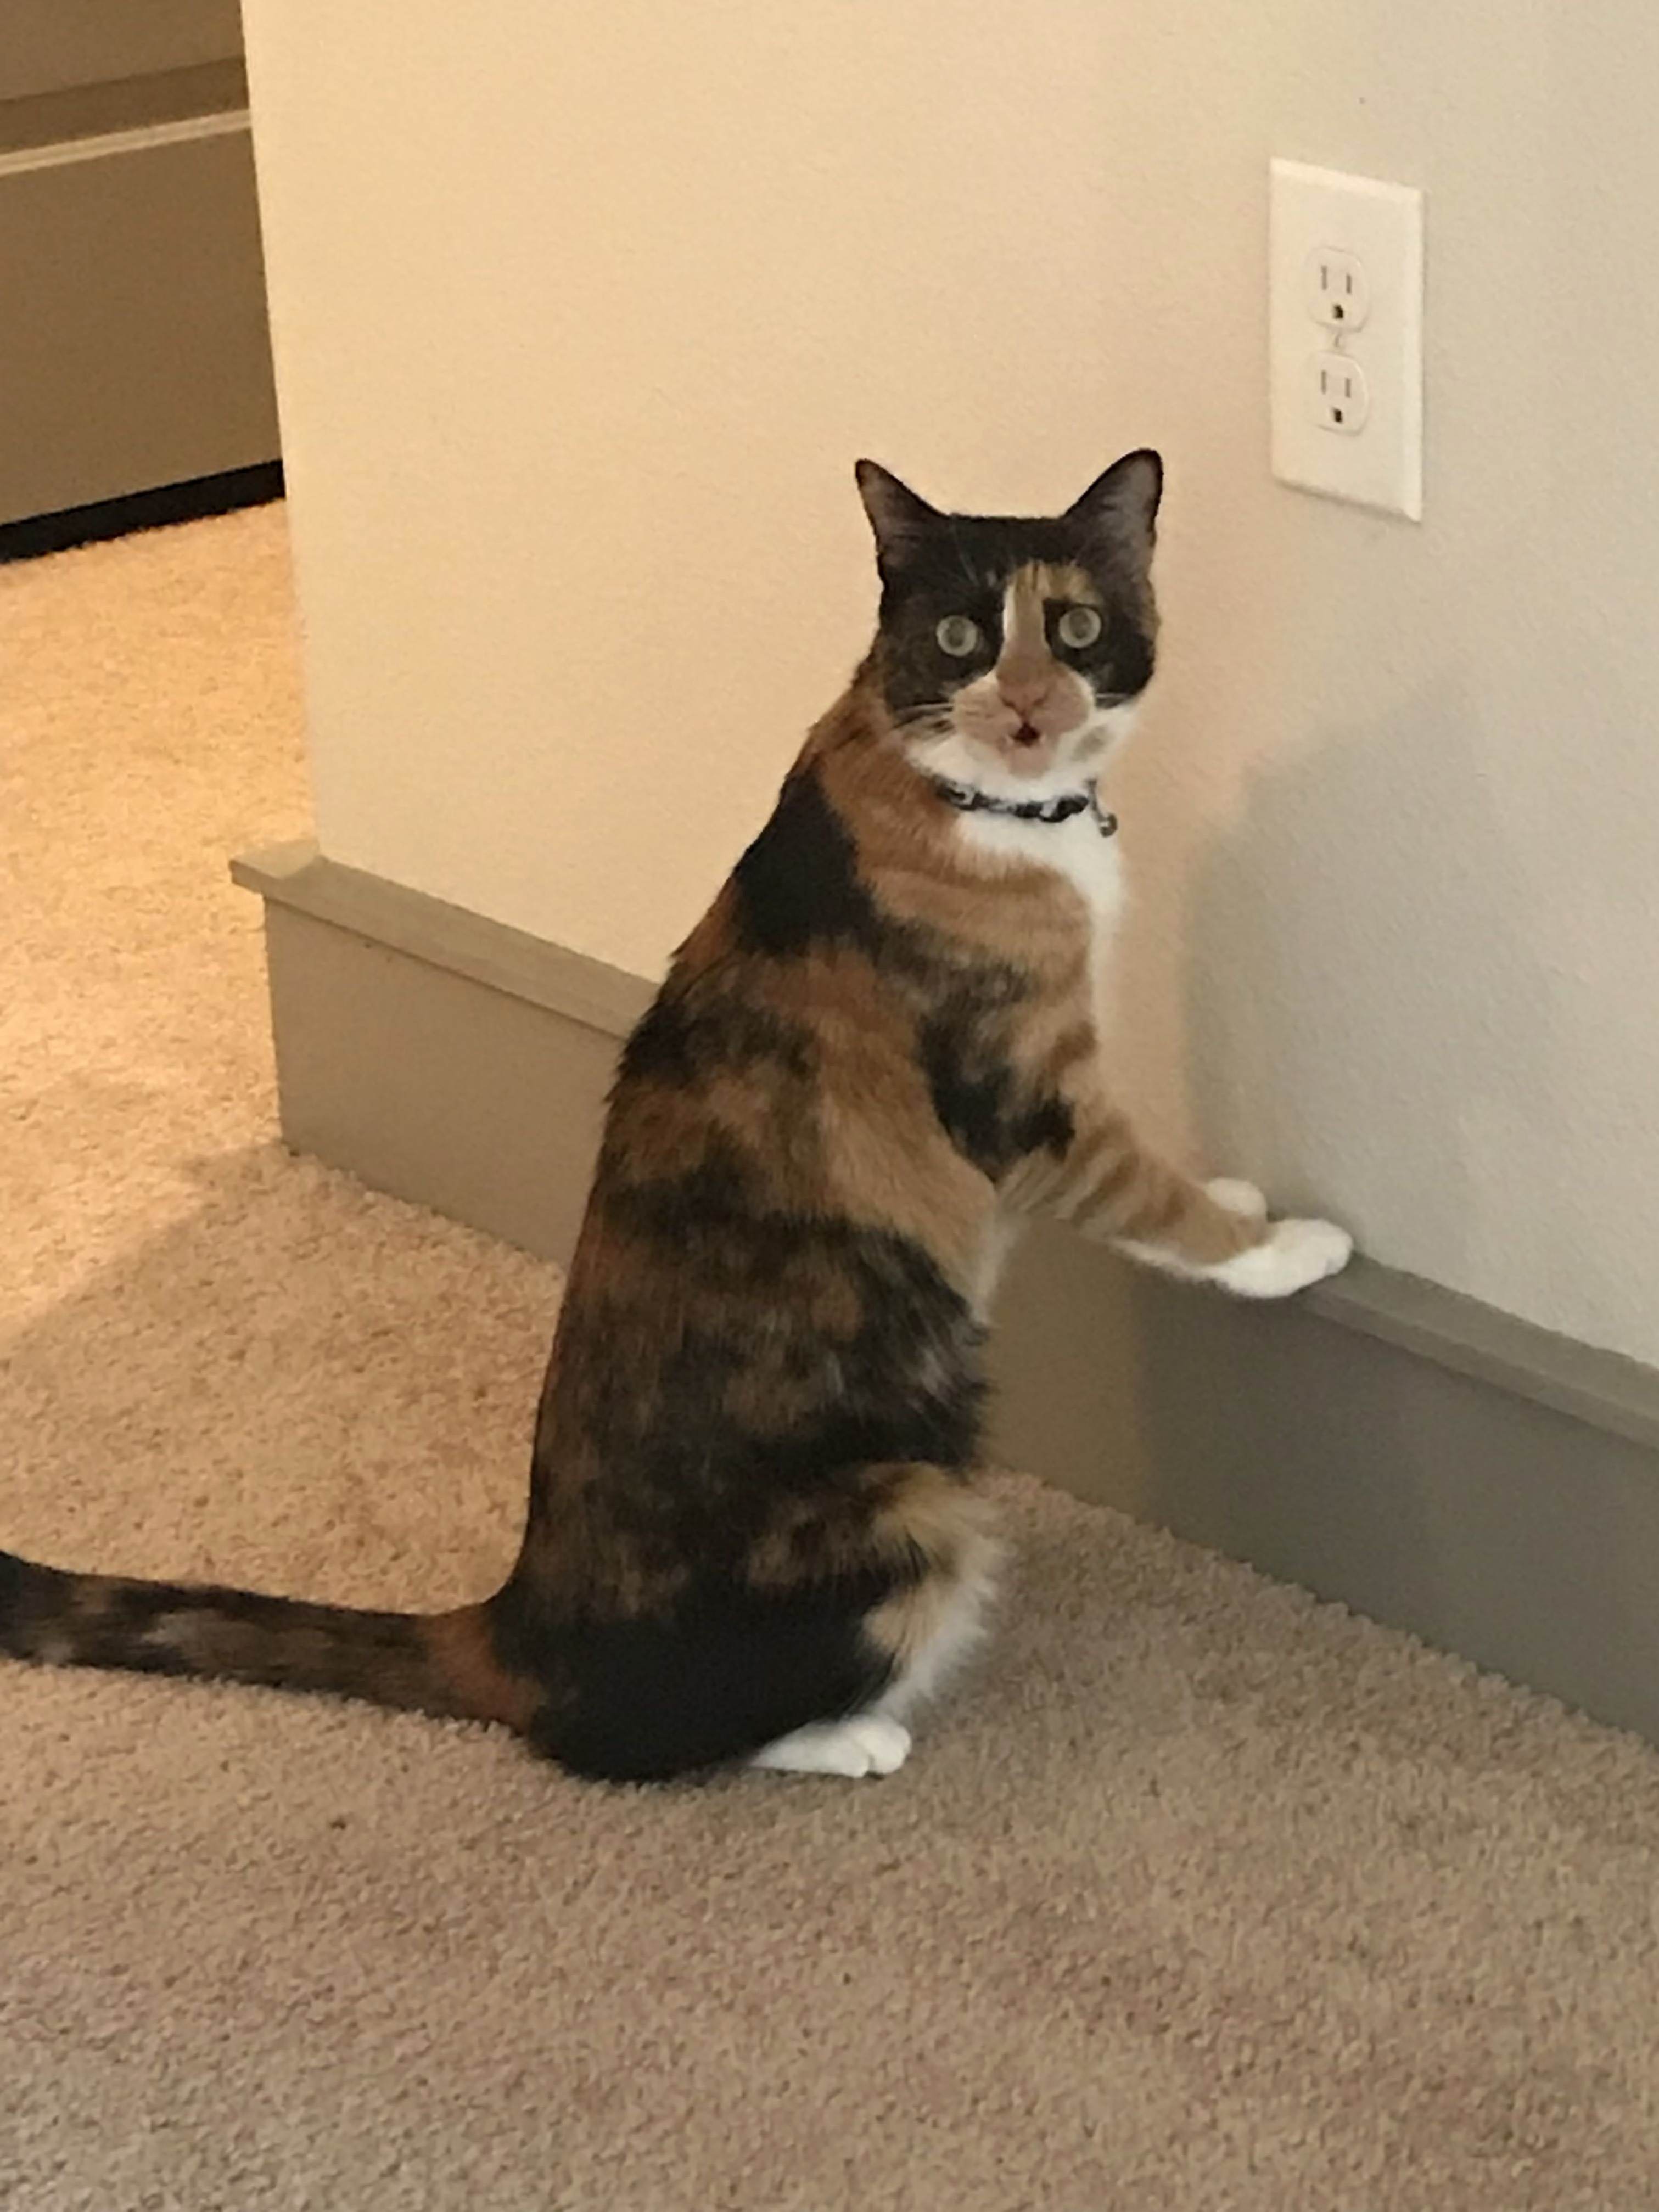 Her face when i ask why she is licking the outlet!